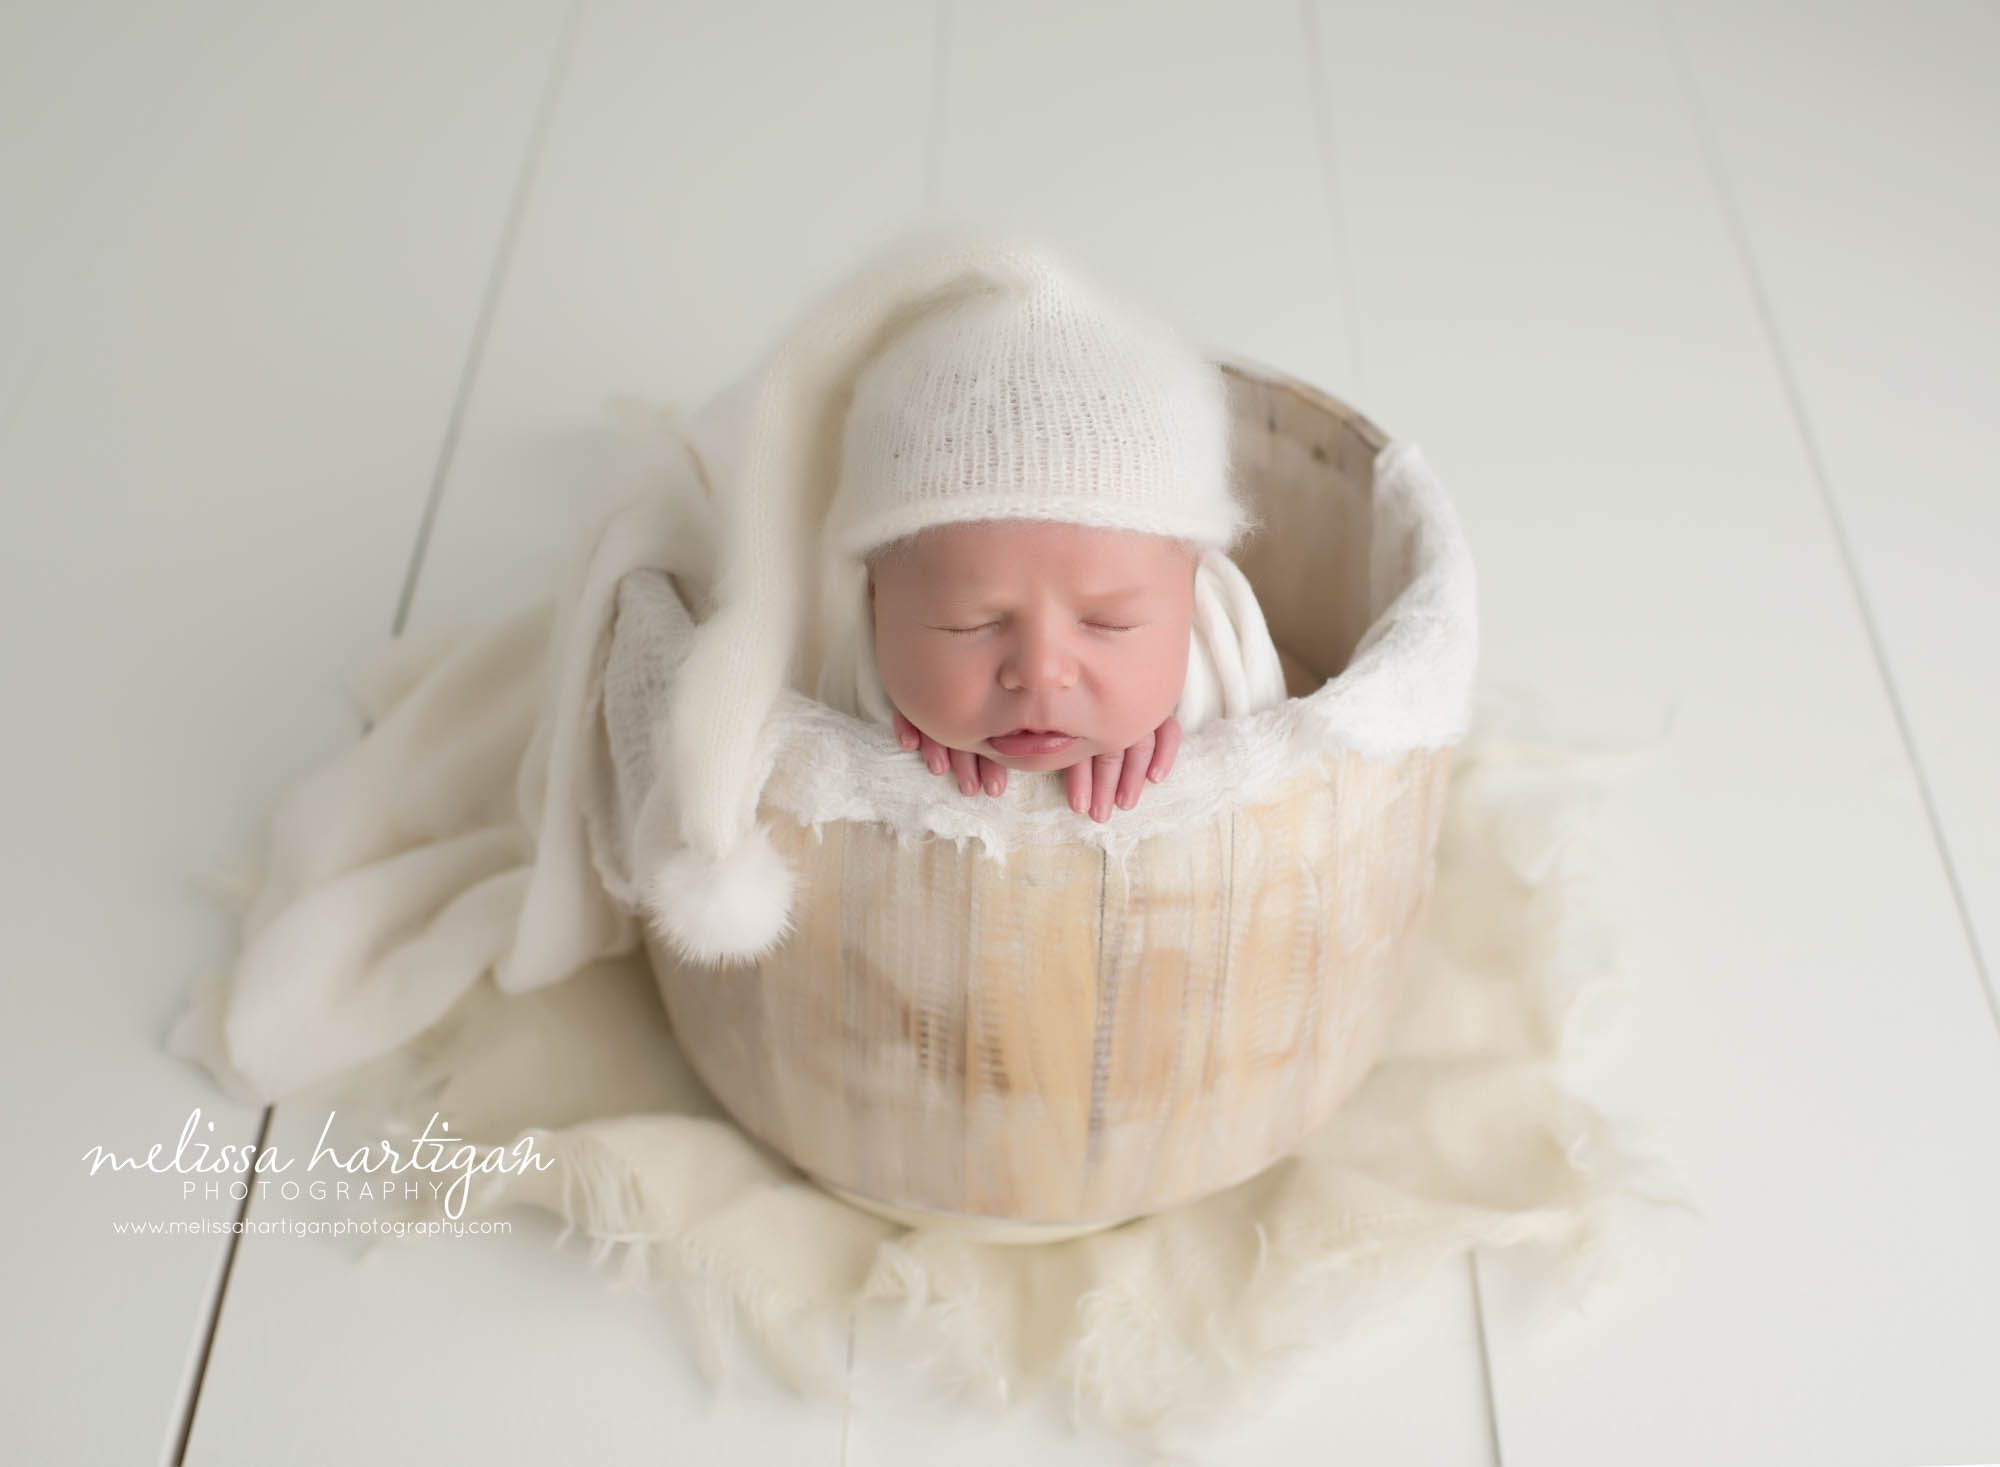 Baby boy posed in bucket with cream and white knitted sleepy cap